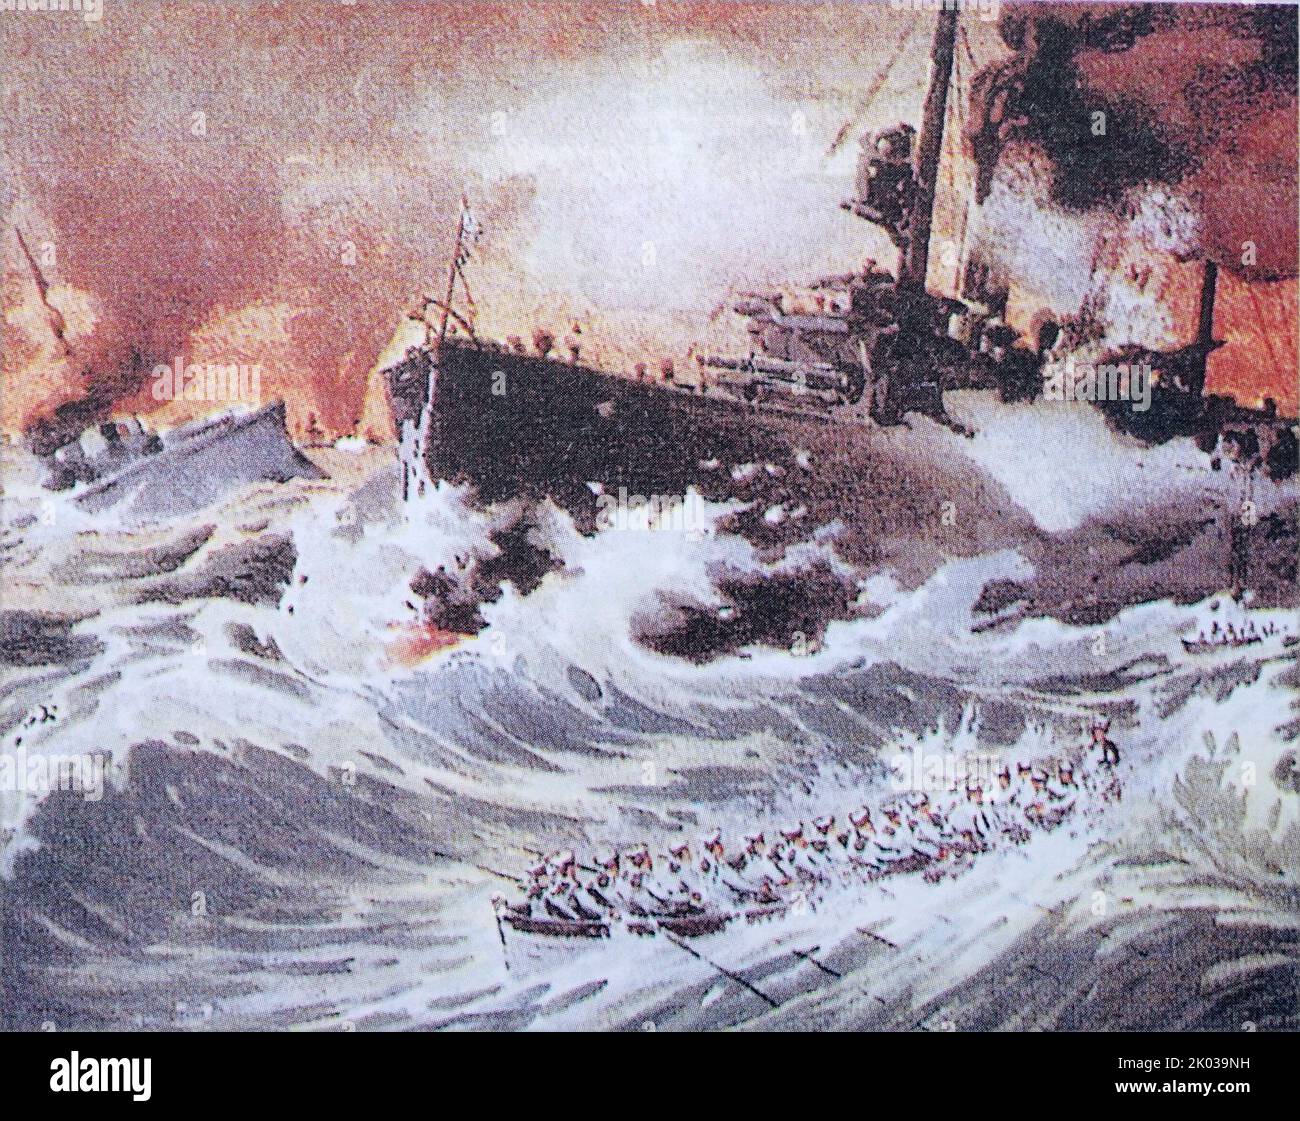 The Battle of Tsushima was a major naval battle fought between Russia and Japan during the Russo-Japanese War. It was fought on 27-28 May 1905 (14-15 May in the Julian calendar then in use in Russia) in the Tsushima Strait located between Korea and southern Japan. Stock Photo